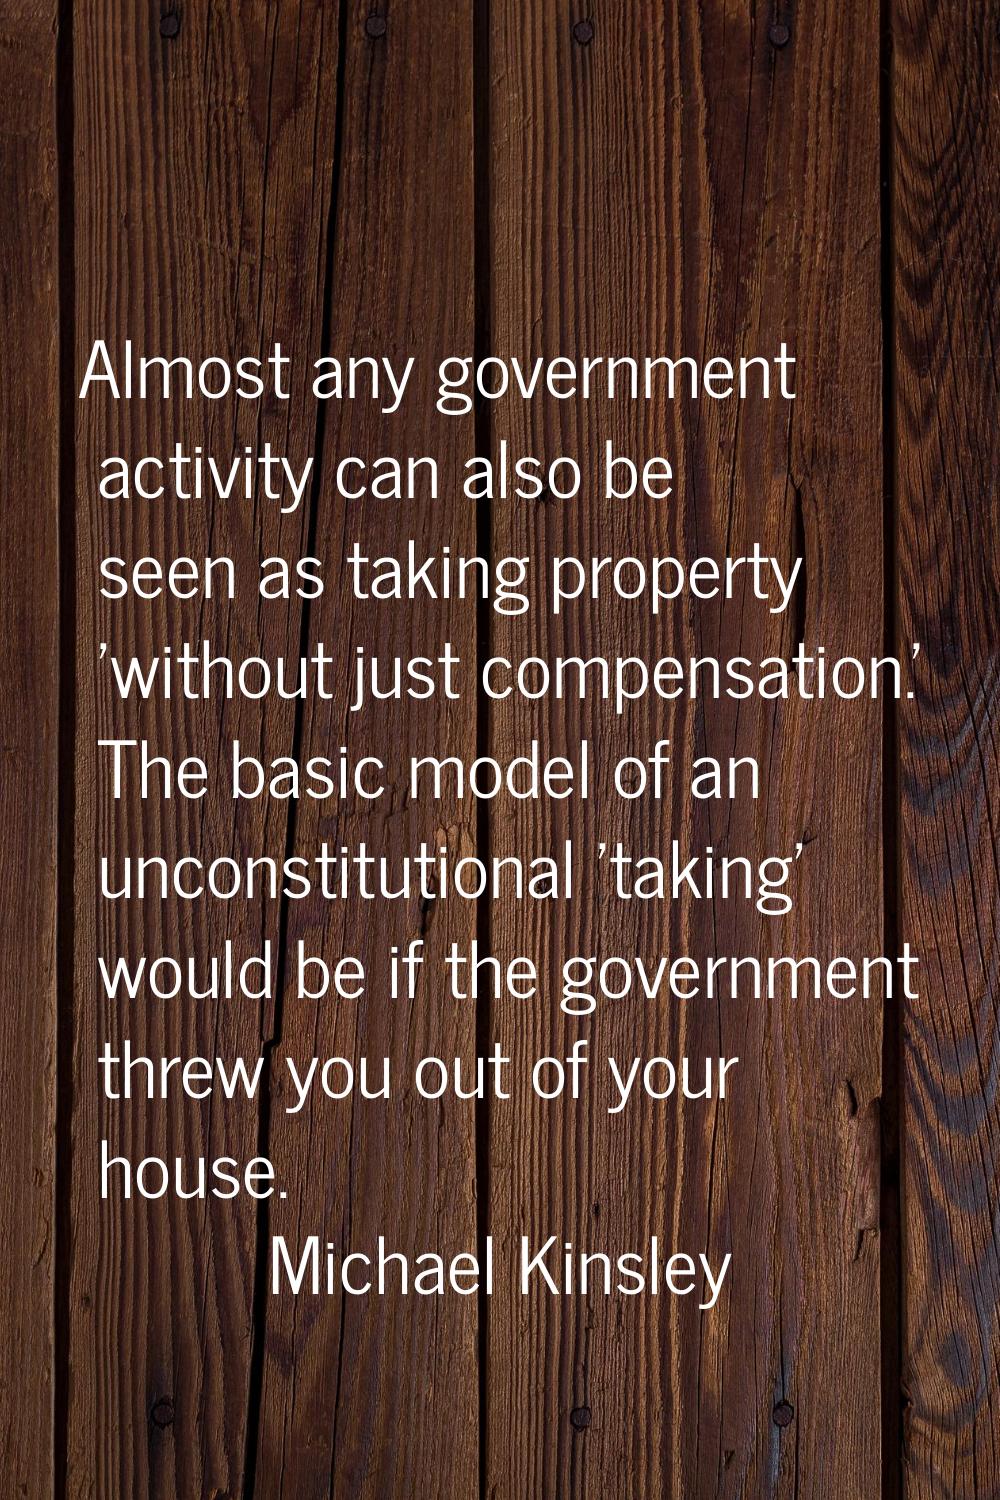 Almost any government activity can also be seen as taking property 'without just compensation.' The